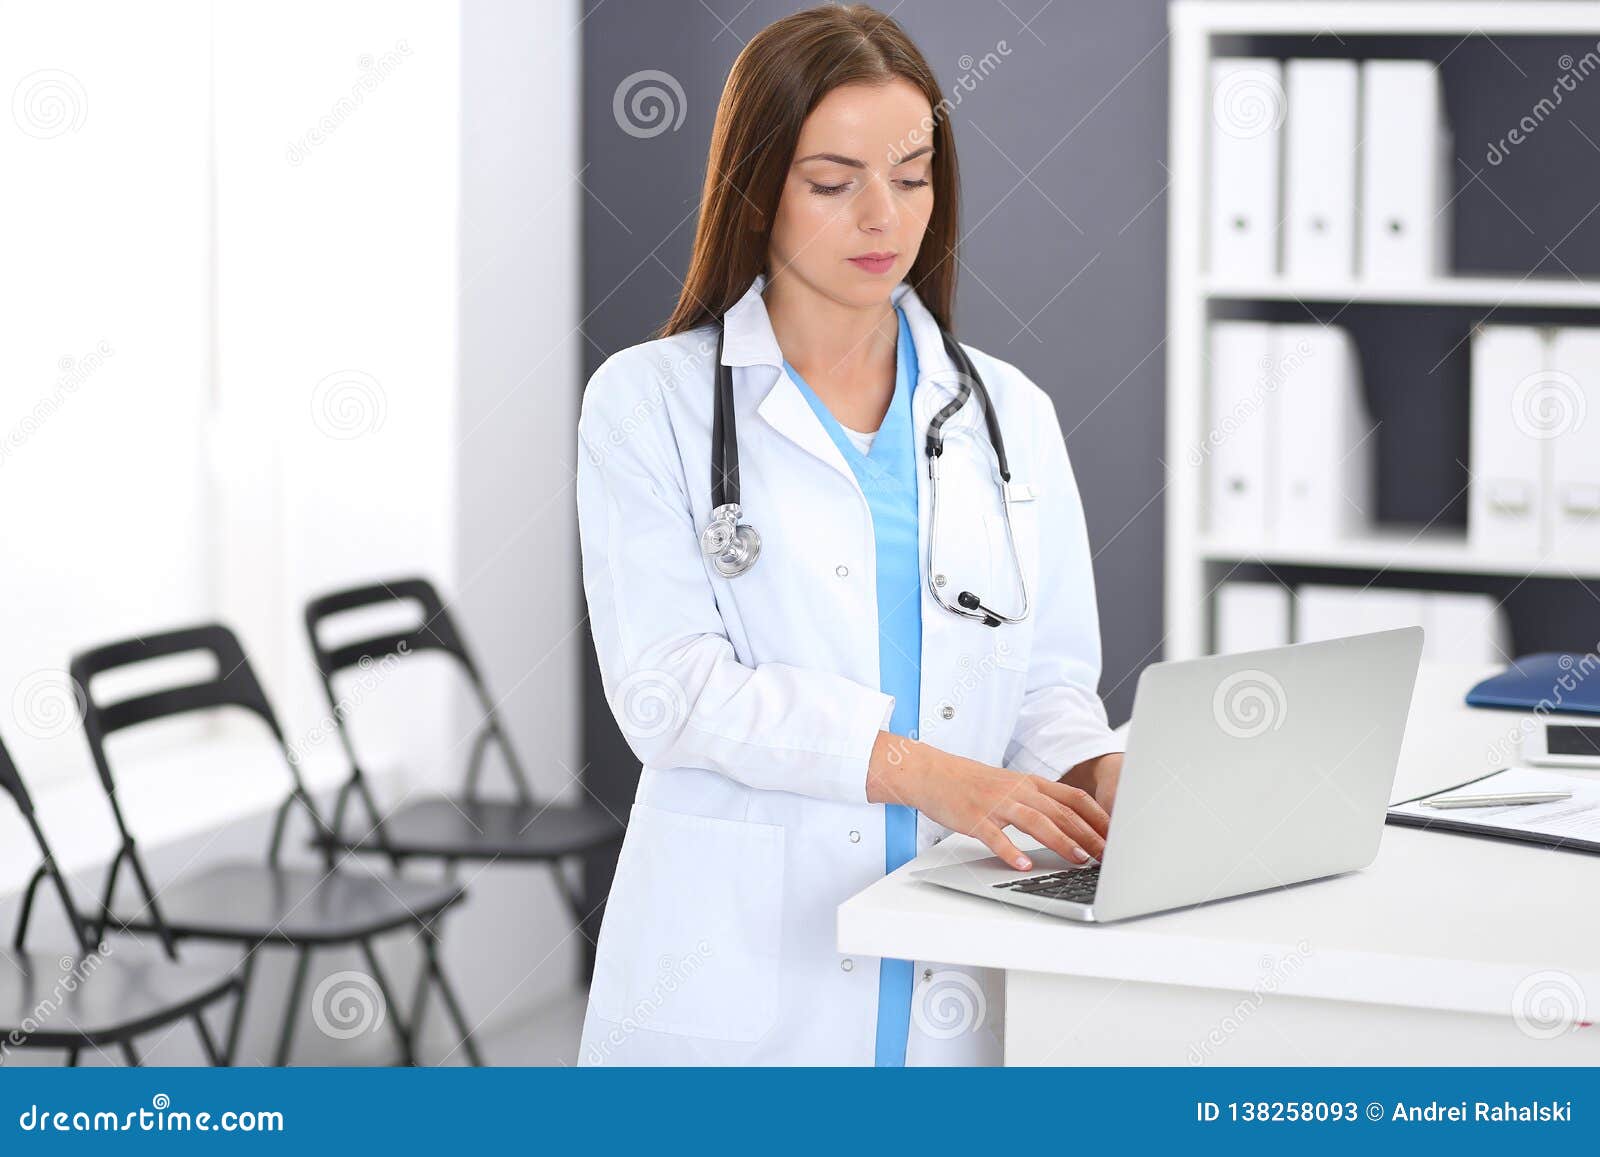 doctor woman at work. portrait of female physician using laptop computer while standing near reception desk at clinic or